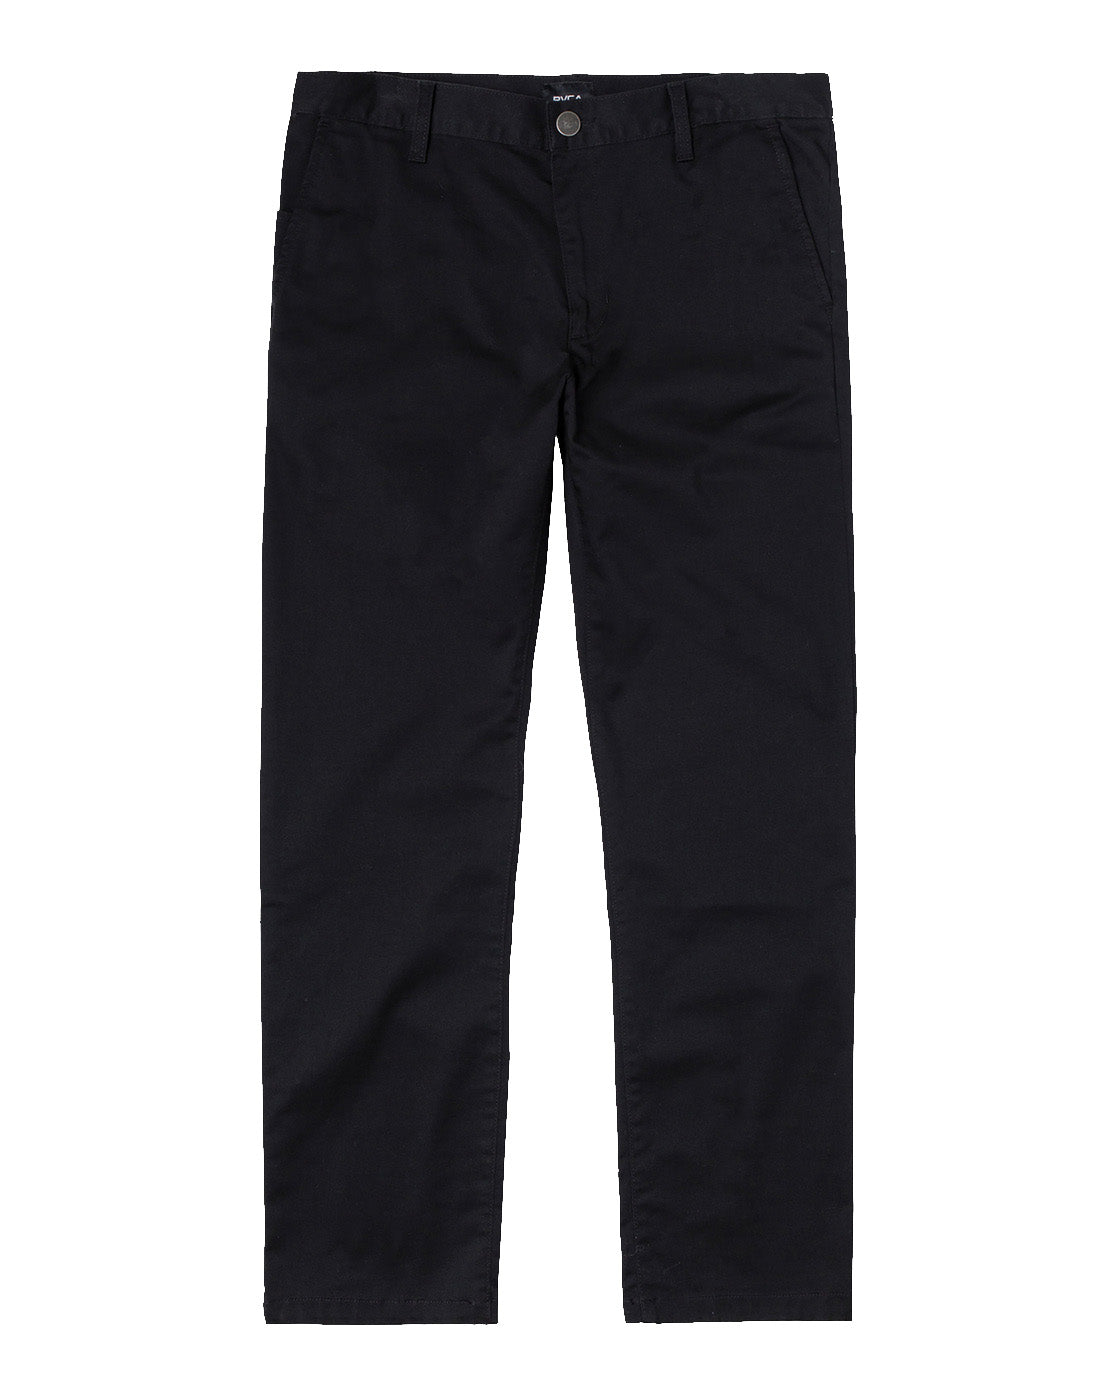 RVCA The Weekend Stretch Pant BLK 31